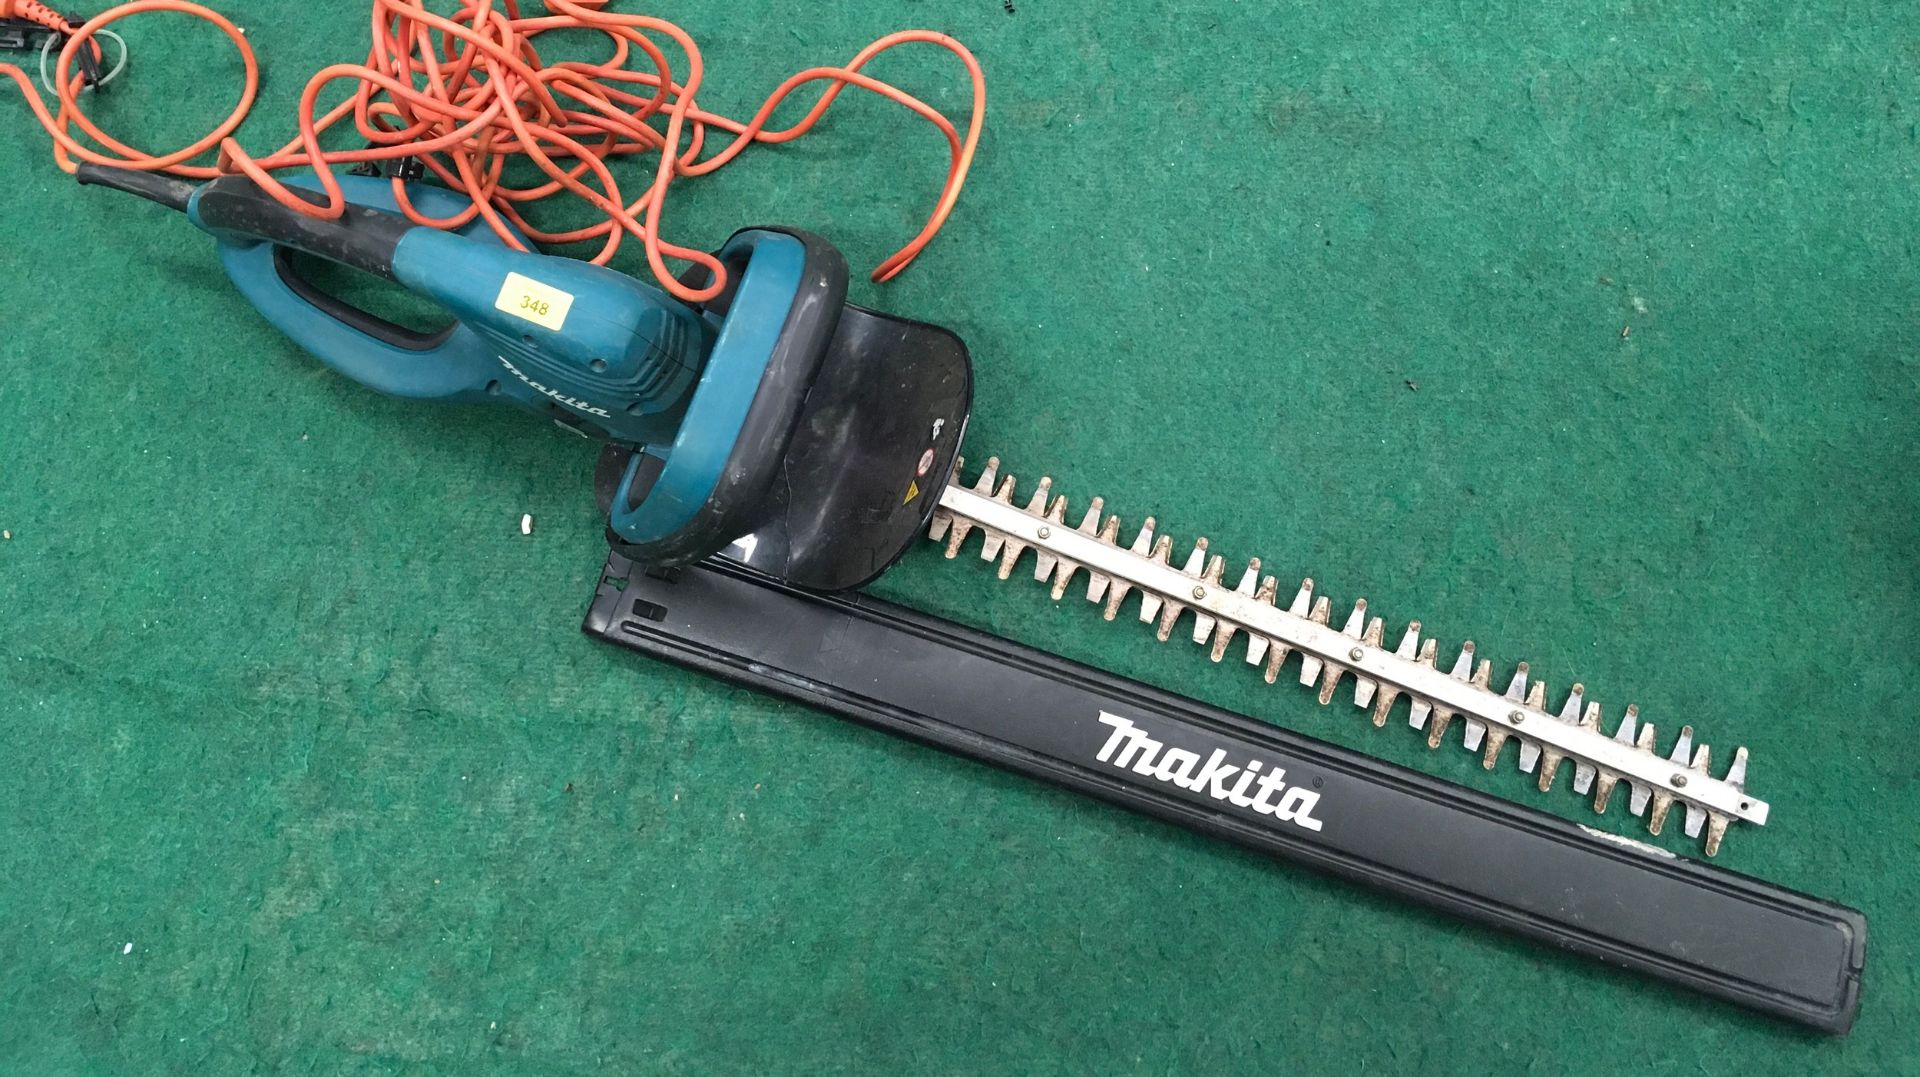 A Makita electric hedge trimmer.